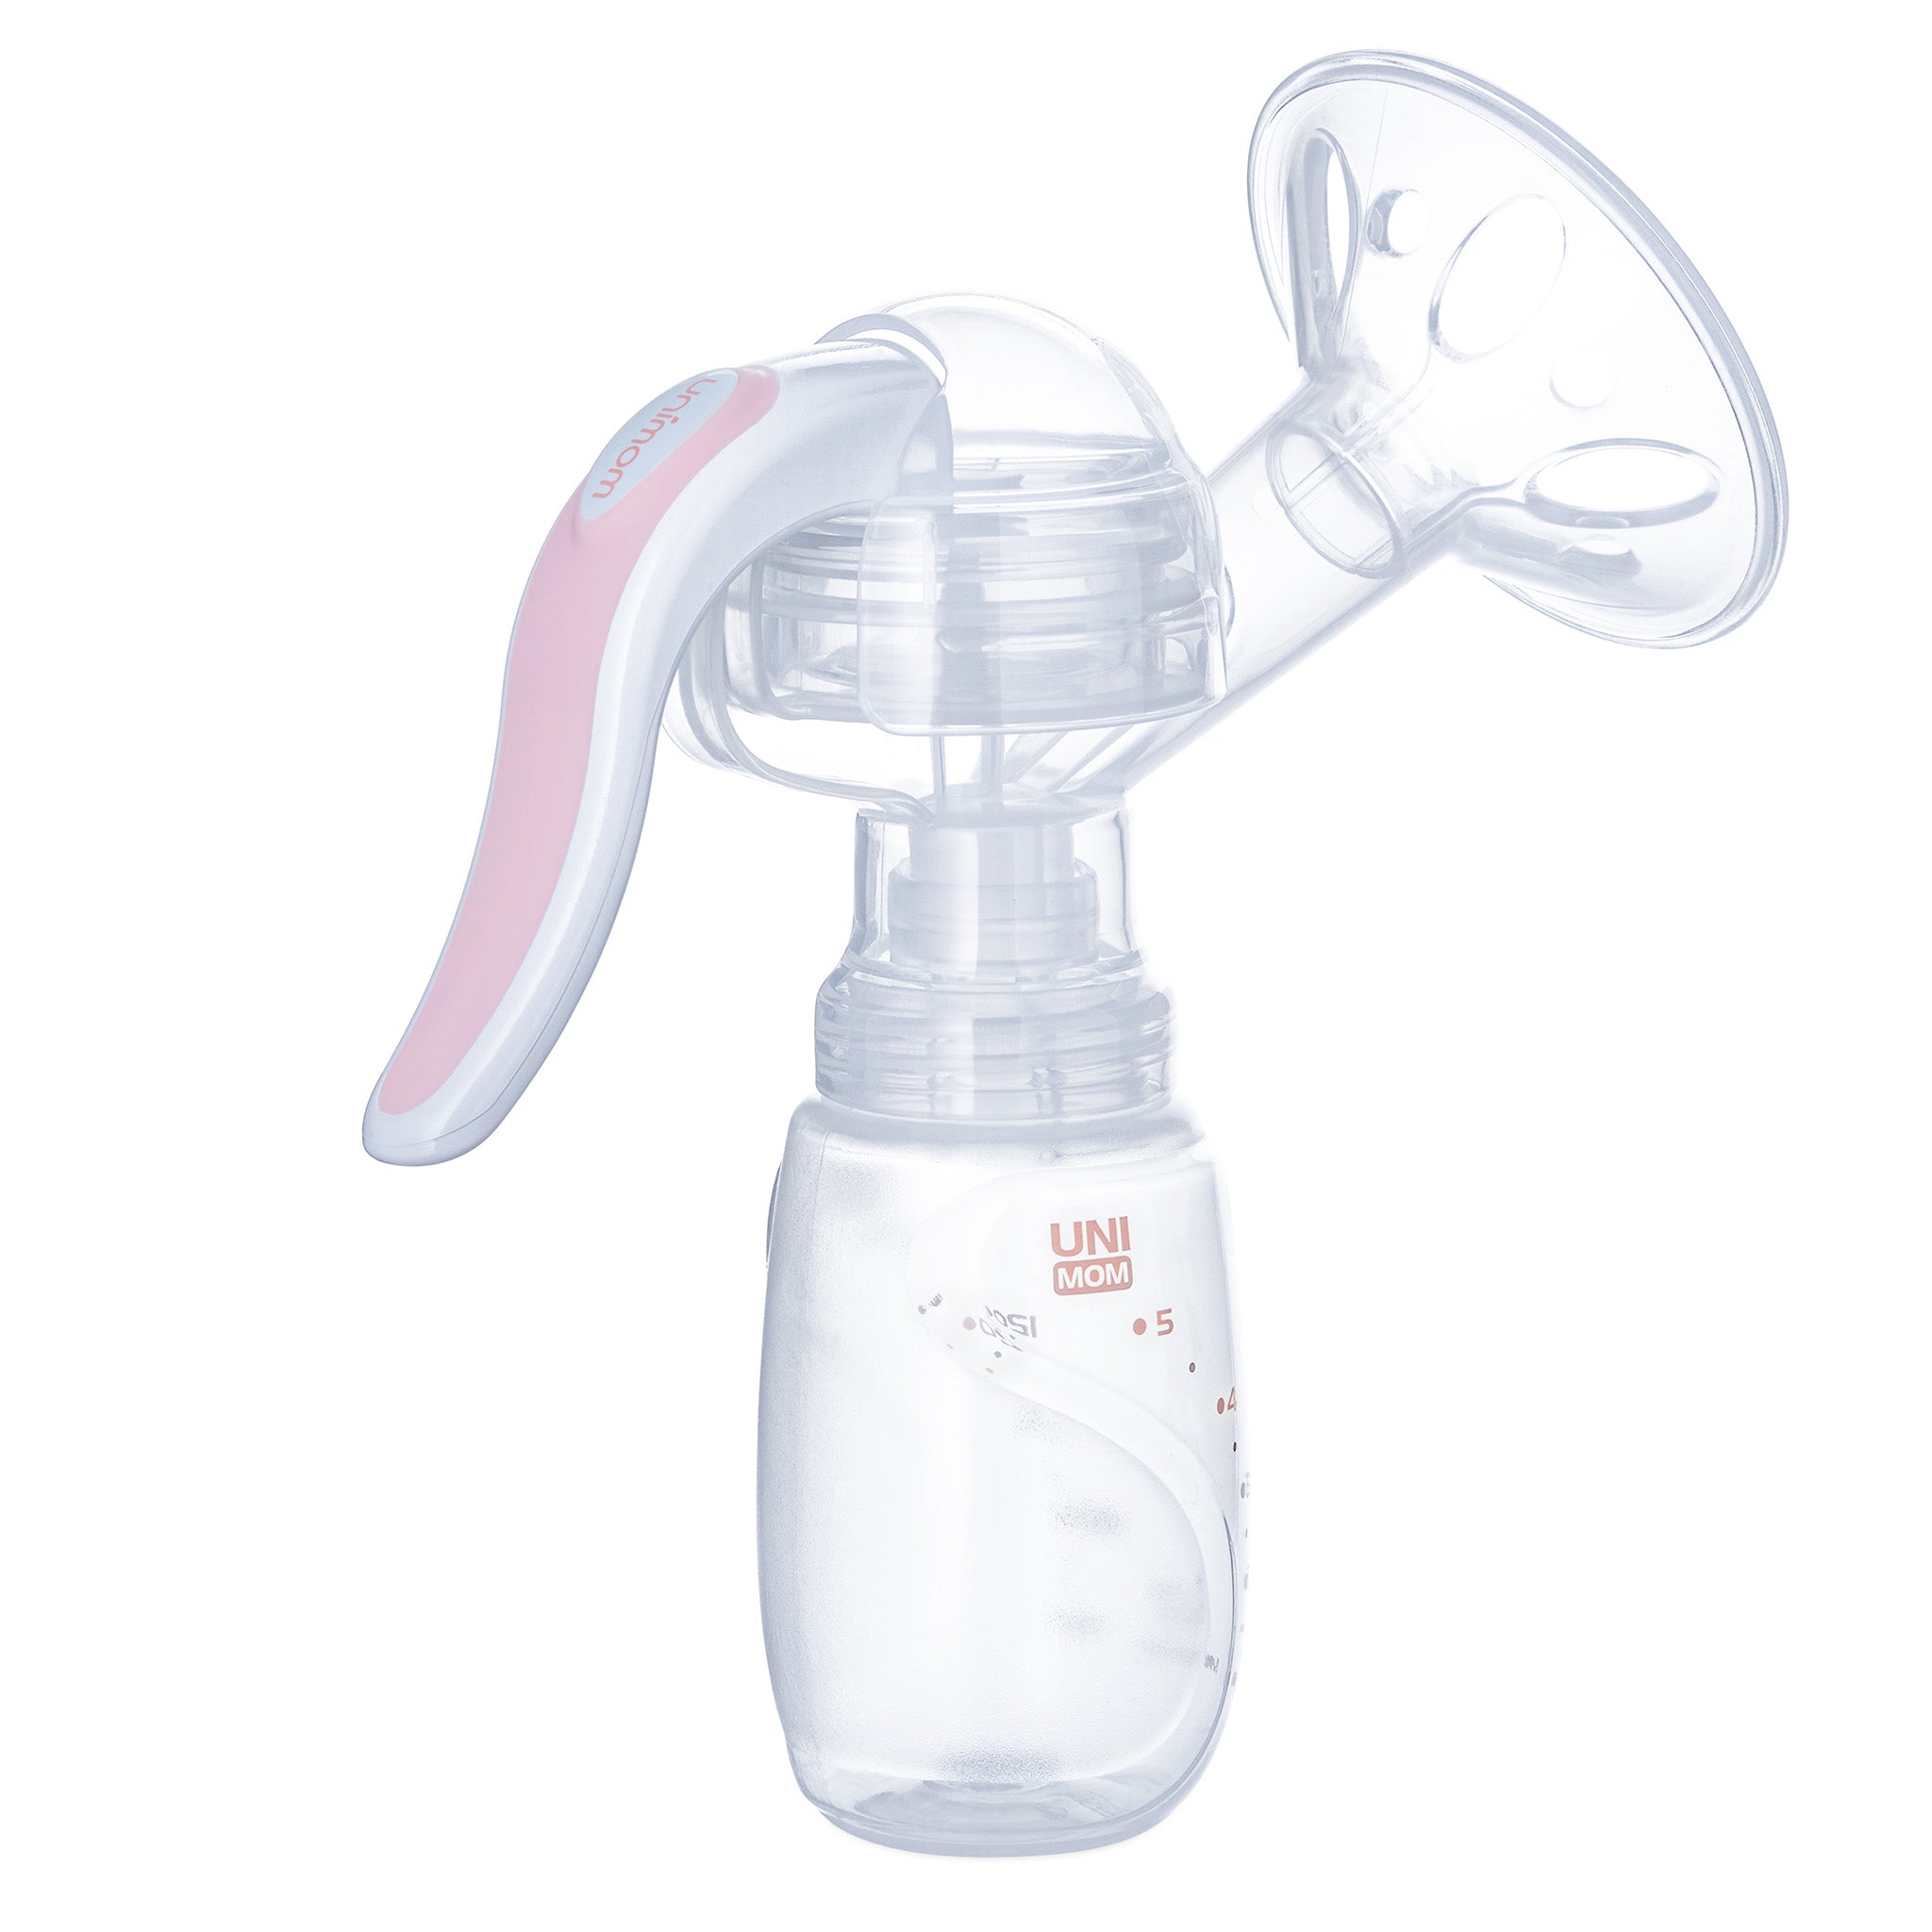 Clerance! Manual Breast Pump, Silicone Hand Pump for Breastfeeding